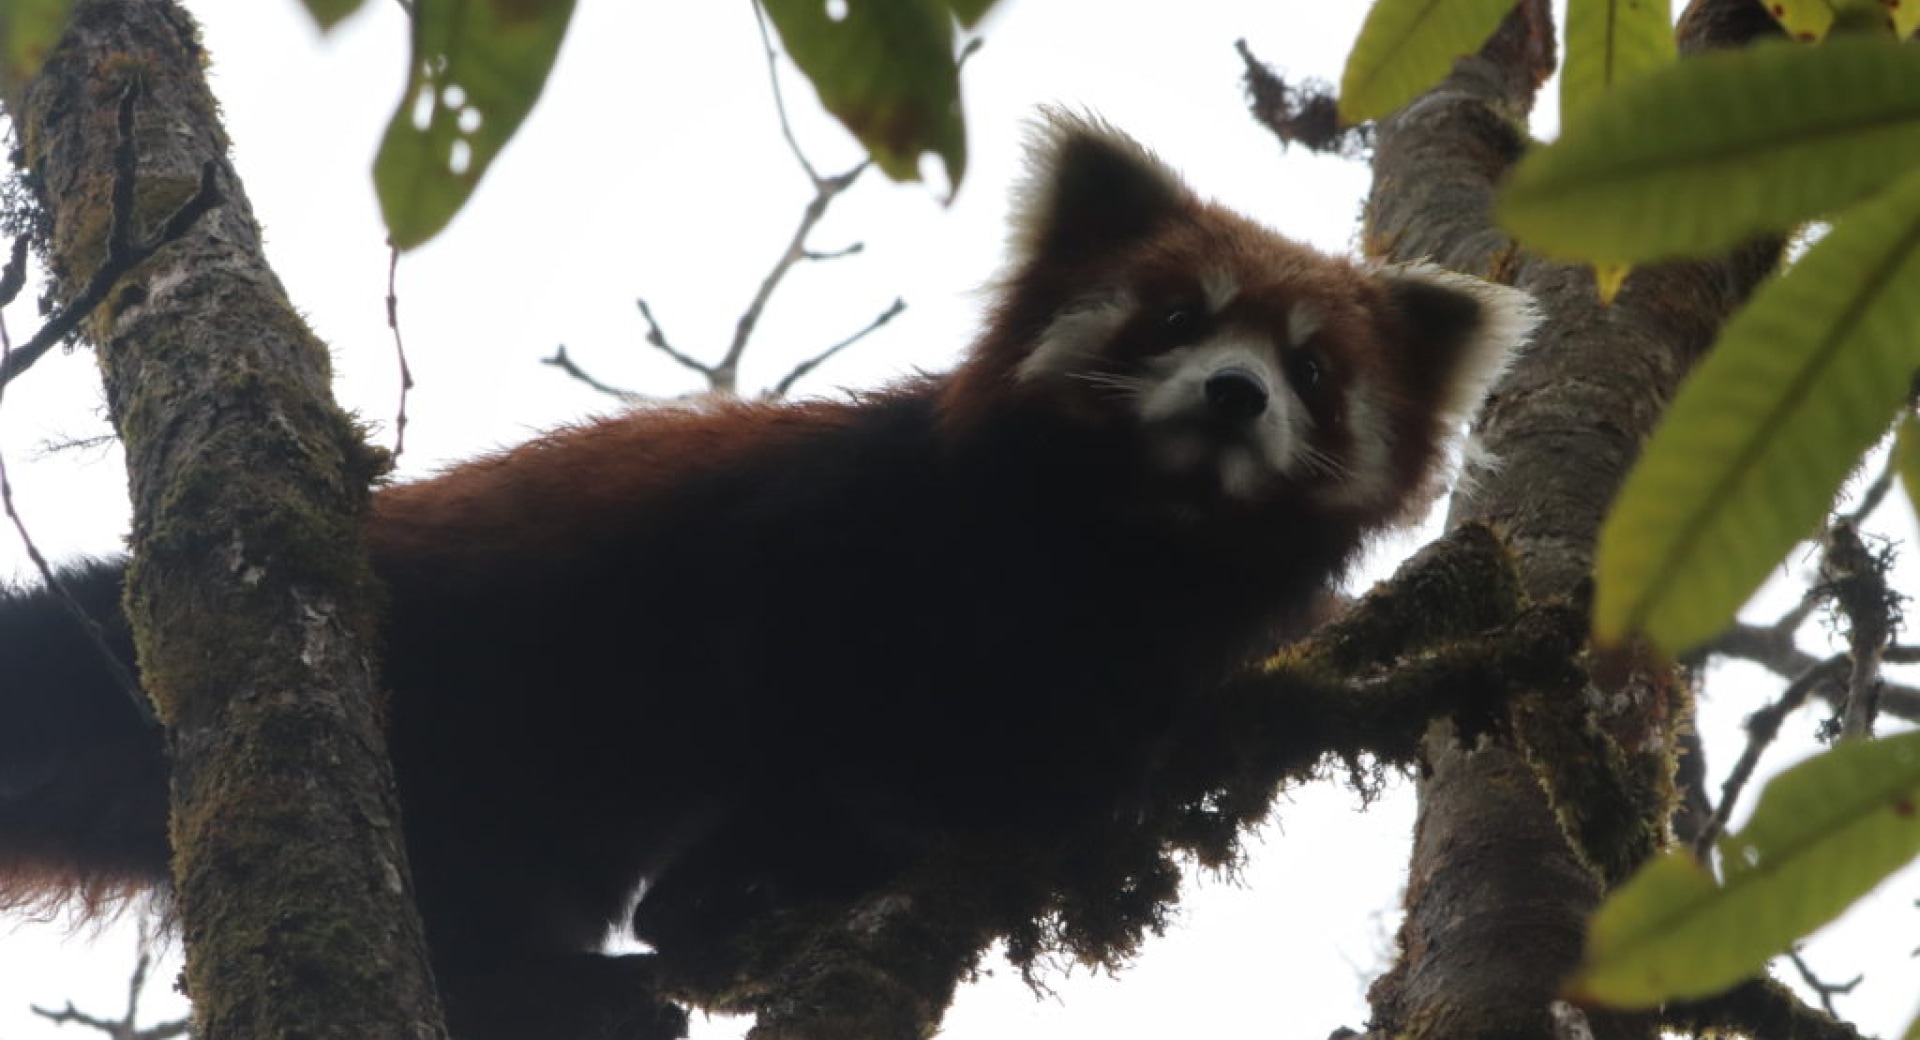 BNF Buys Locally; Saves Red Pandas Globally